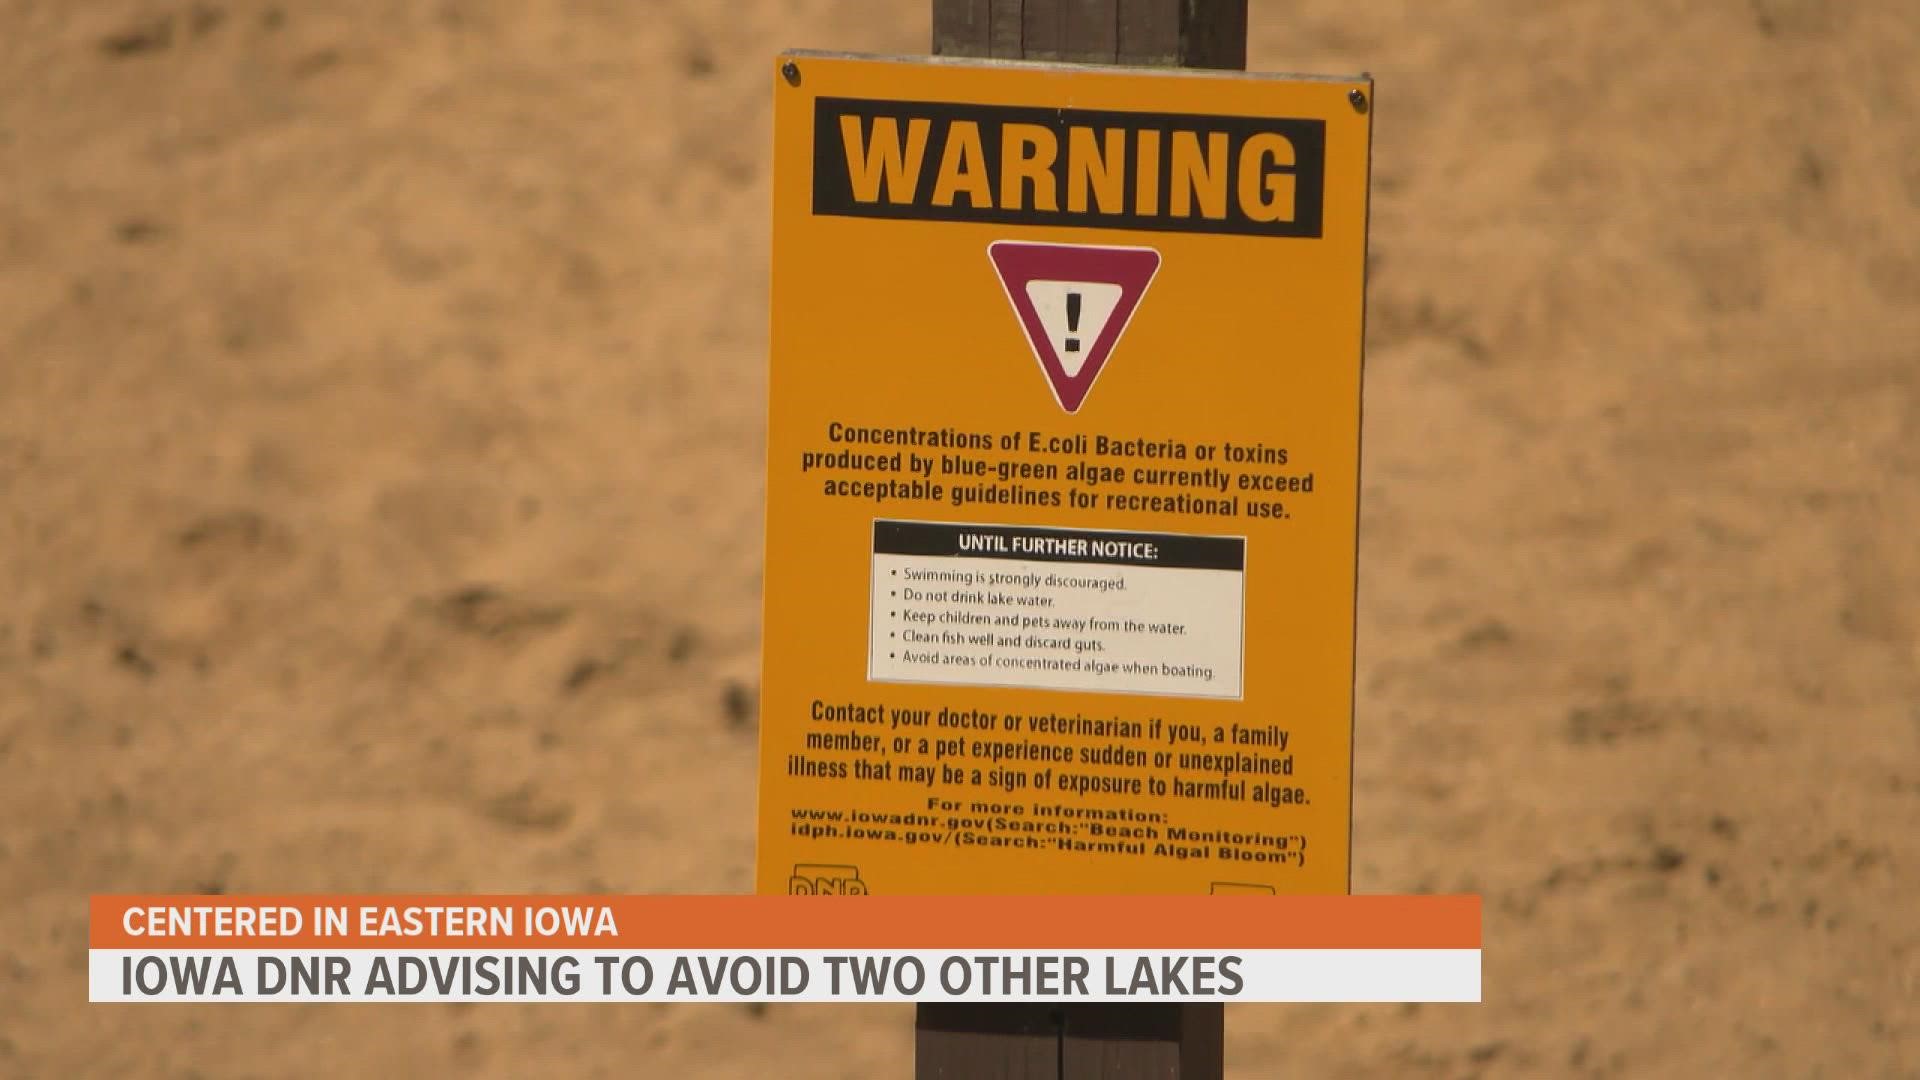 While Lake of Three Fires is now open after testing, Iowans should continue to avoid Lake Darling and Backbone Lake in Eastern Iowa.